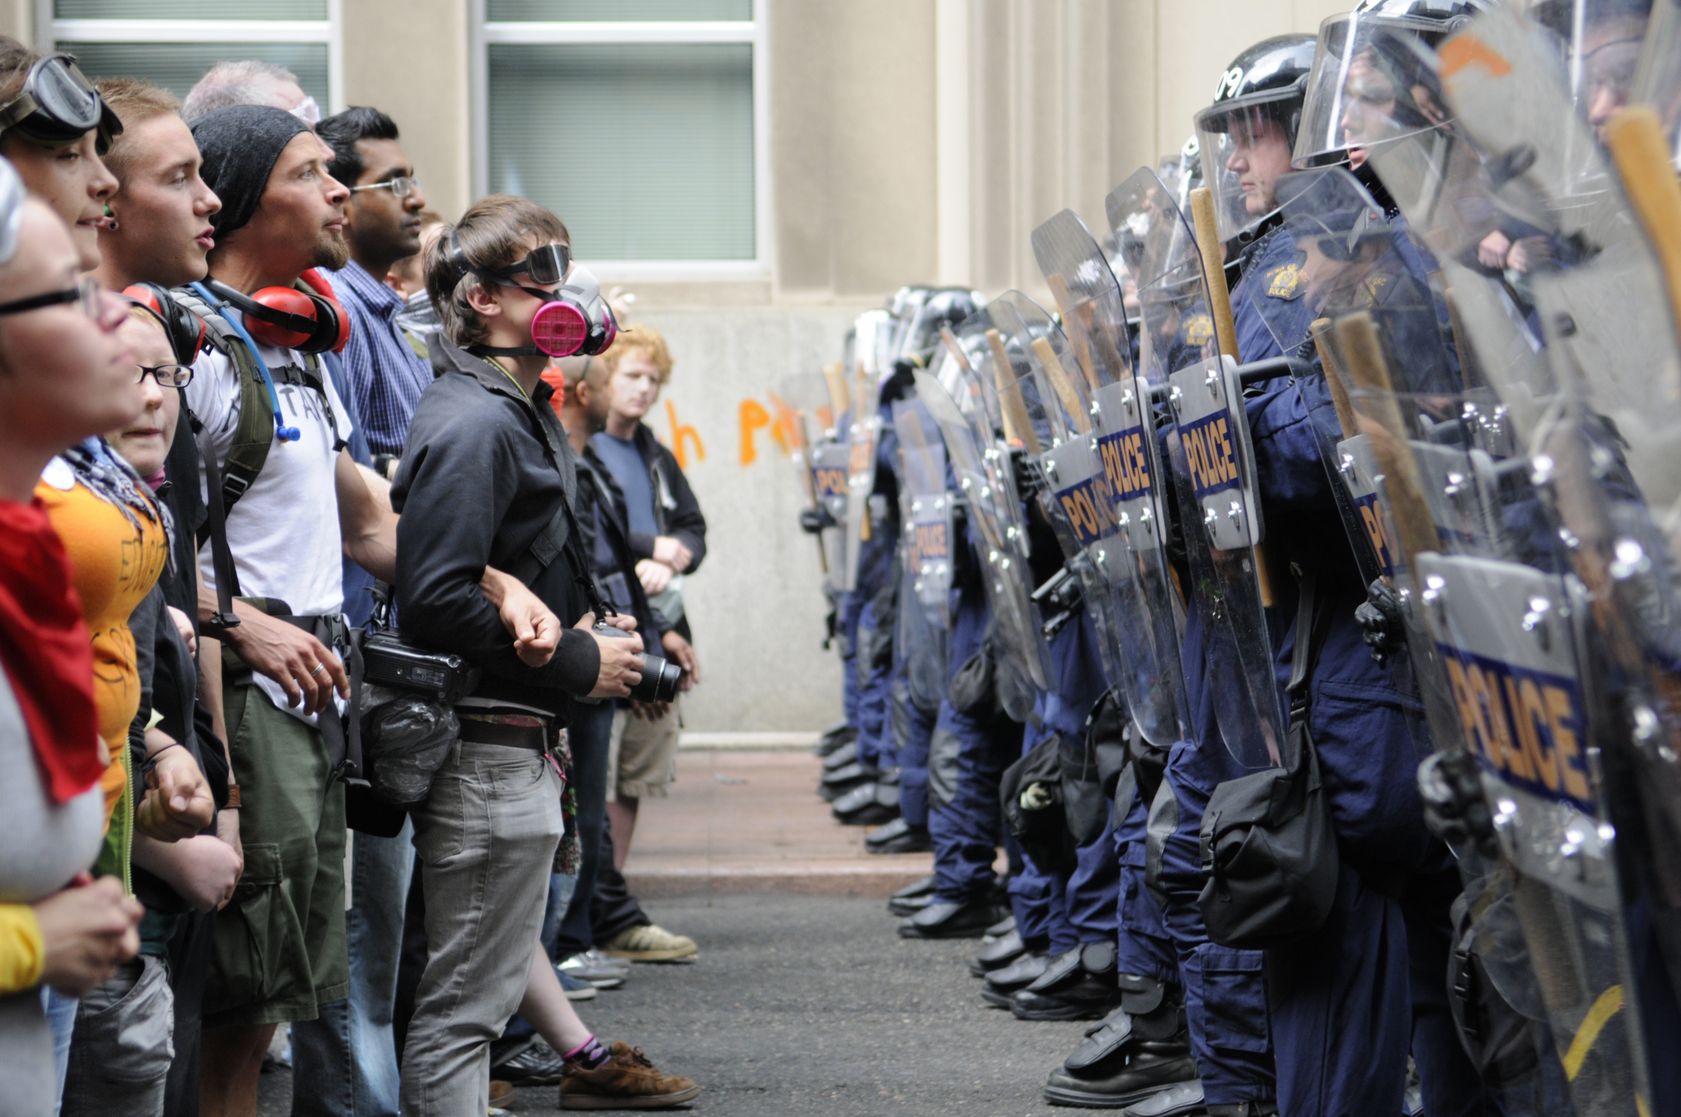 20263987 - toronto-june 26: toronto riot police (r) restrict protesters from entering g20 summit area at the metro convention centre on june 26, 2010 in toronto, canada.